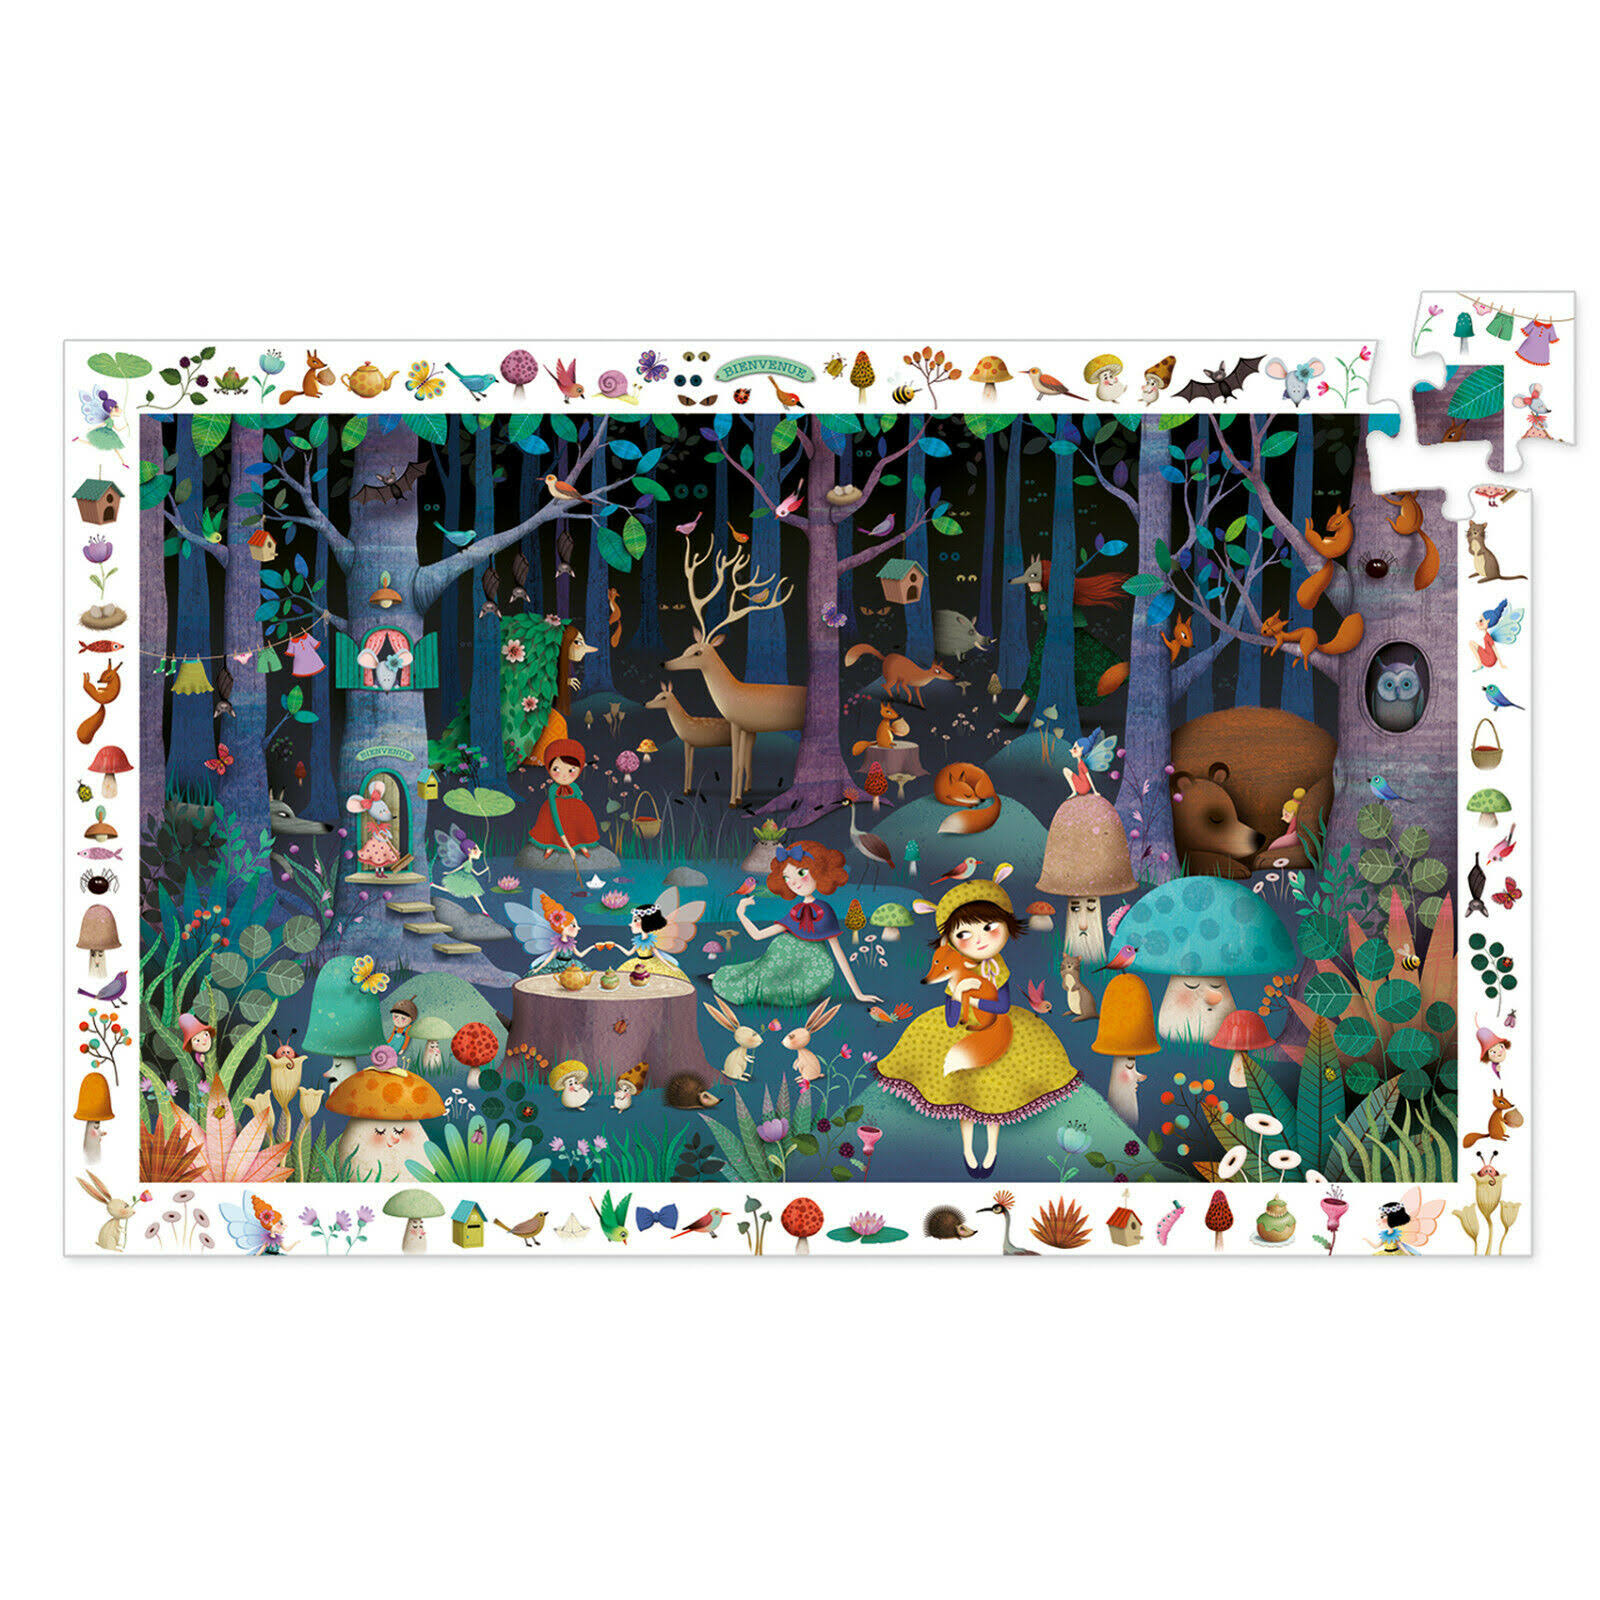 Djeco Enchanted Forest Puzzle - 100 Pieces